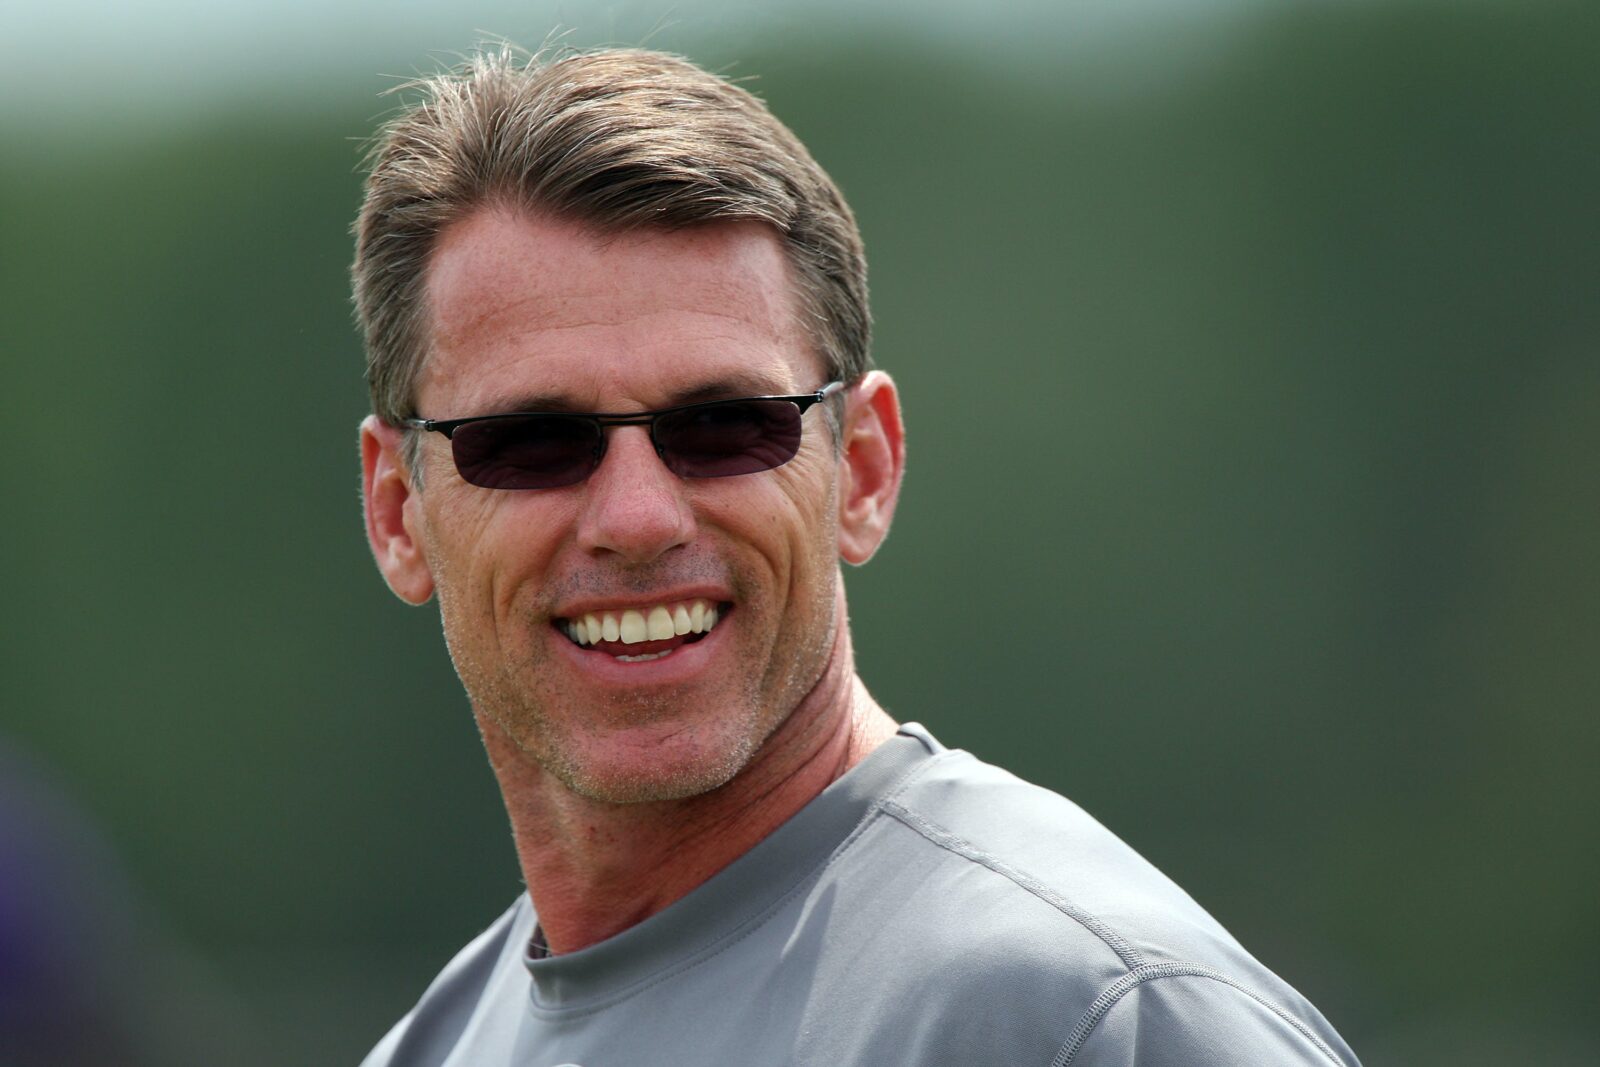 Stream Rick Spielman, Minnesota Vikings GM, joined The SiriusXM Blitz and  discussed the Vikings first round by SiriusXM Sports